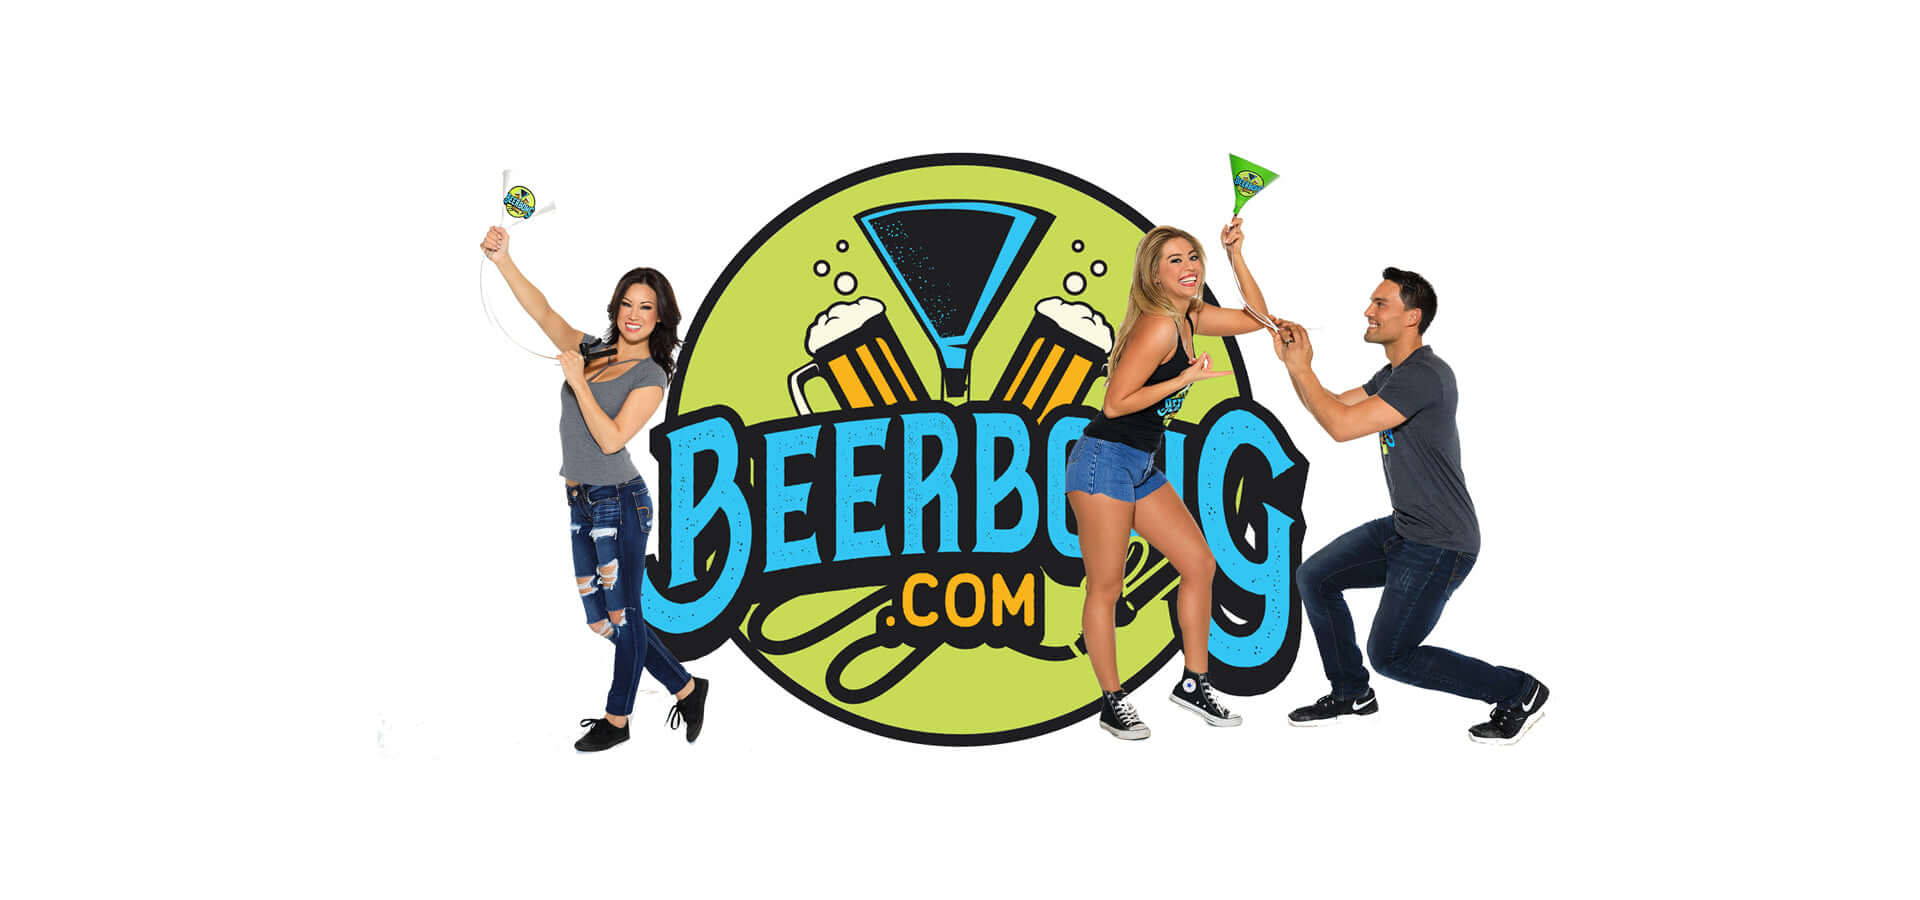 Beer Bong and Beer Funnel On Sale - Made in USA Beer Bong